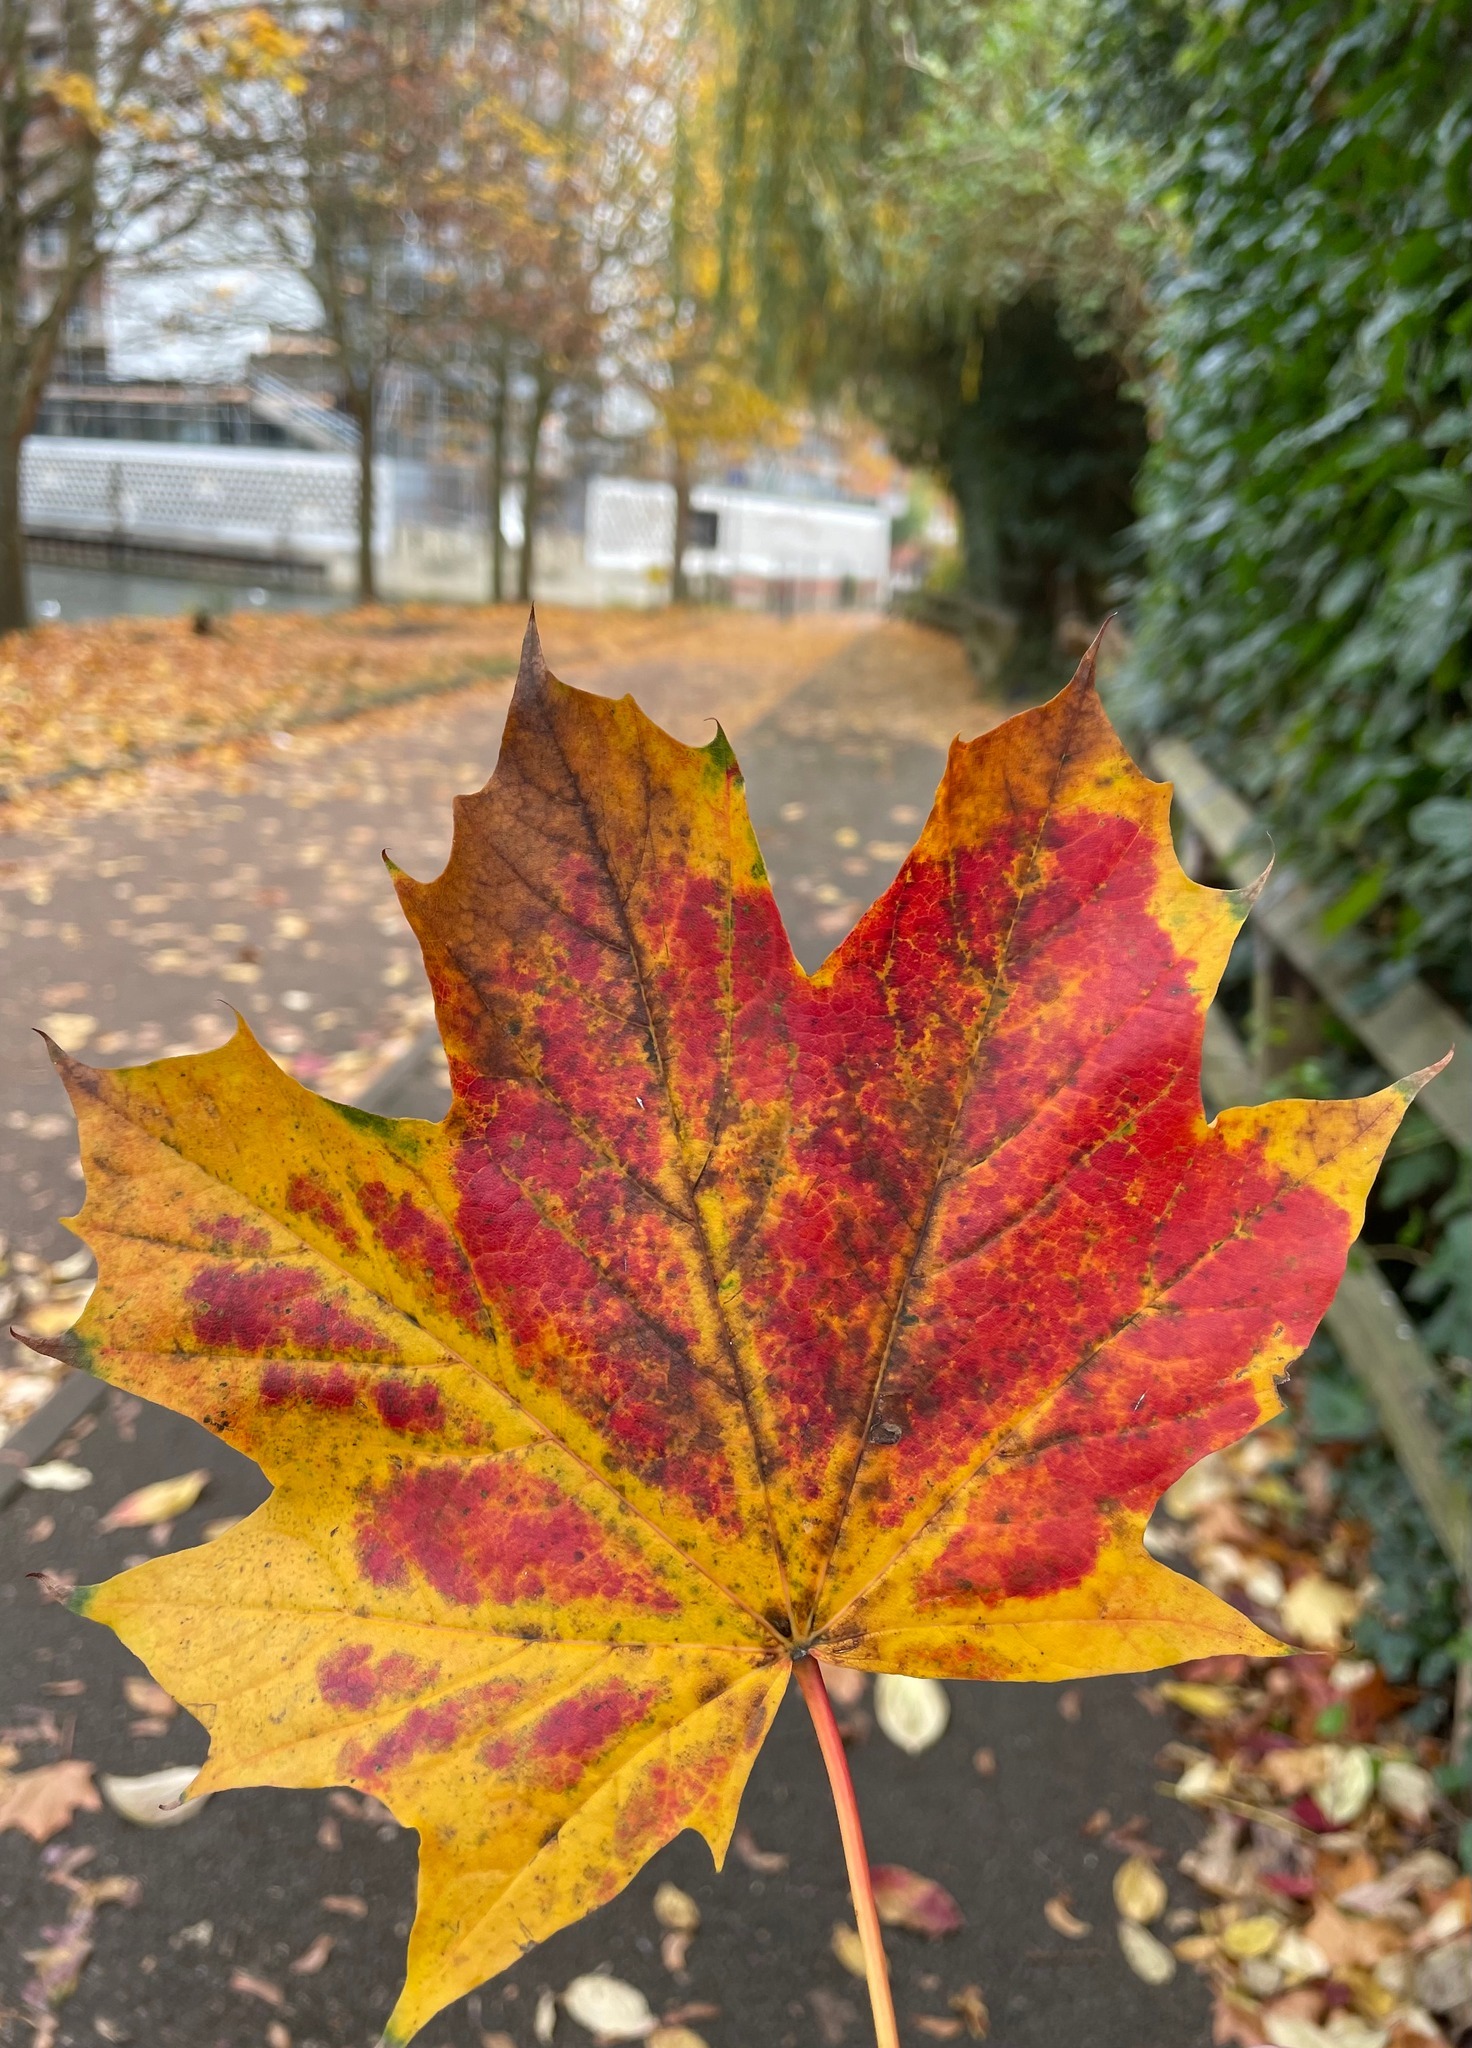 One of the many fallen leaves in Berkshire (Cassandra Simpson)